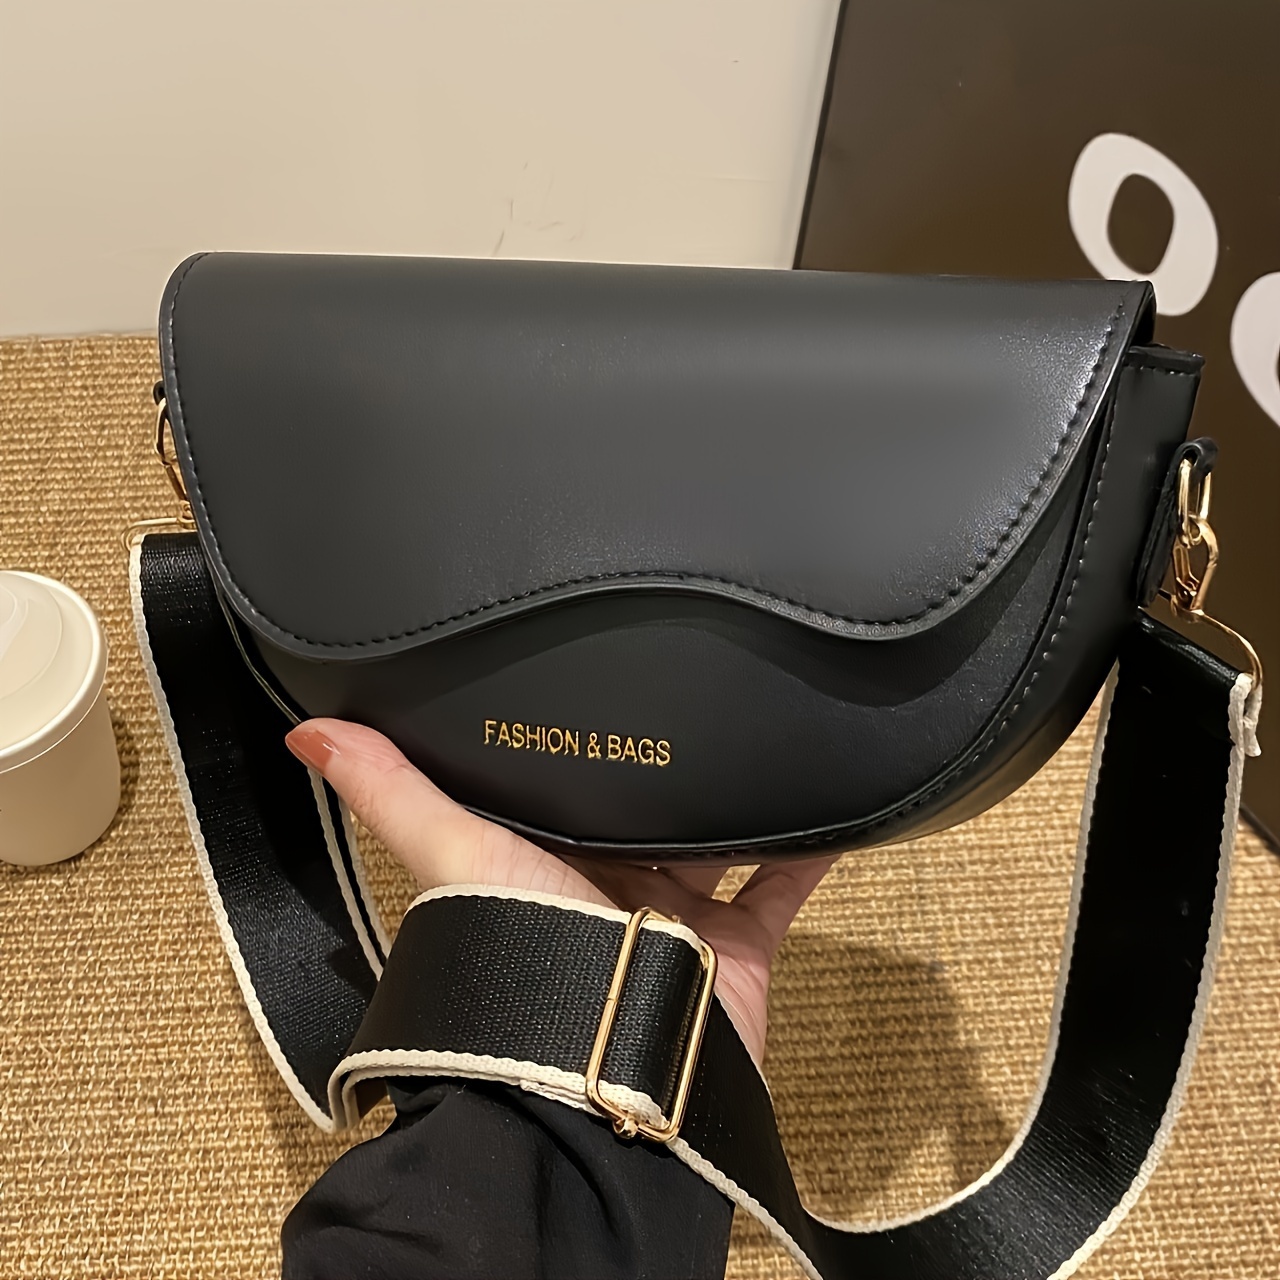 

Women's Pu Leather Fashion Saddle Bag, Small Crossbody With Wide Shoulder Strap, Magnetic Closure, Shoulder Purse For Commuting And Travel, Elegant Storage Accessory